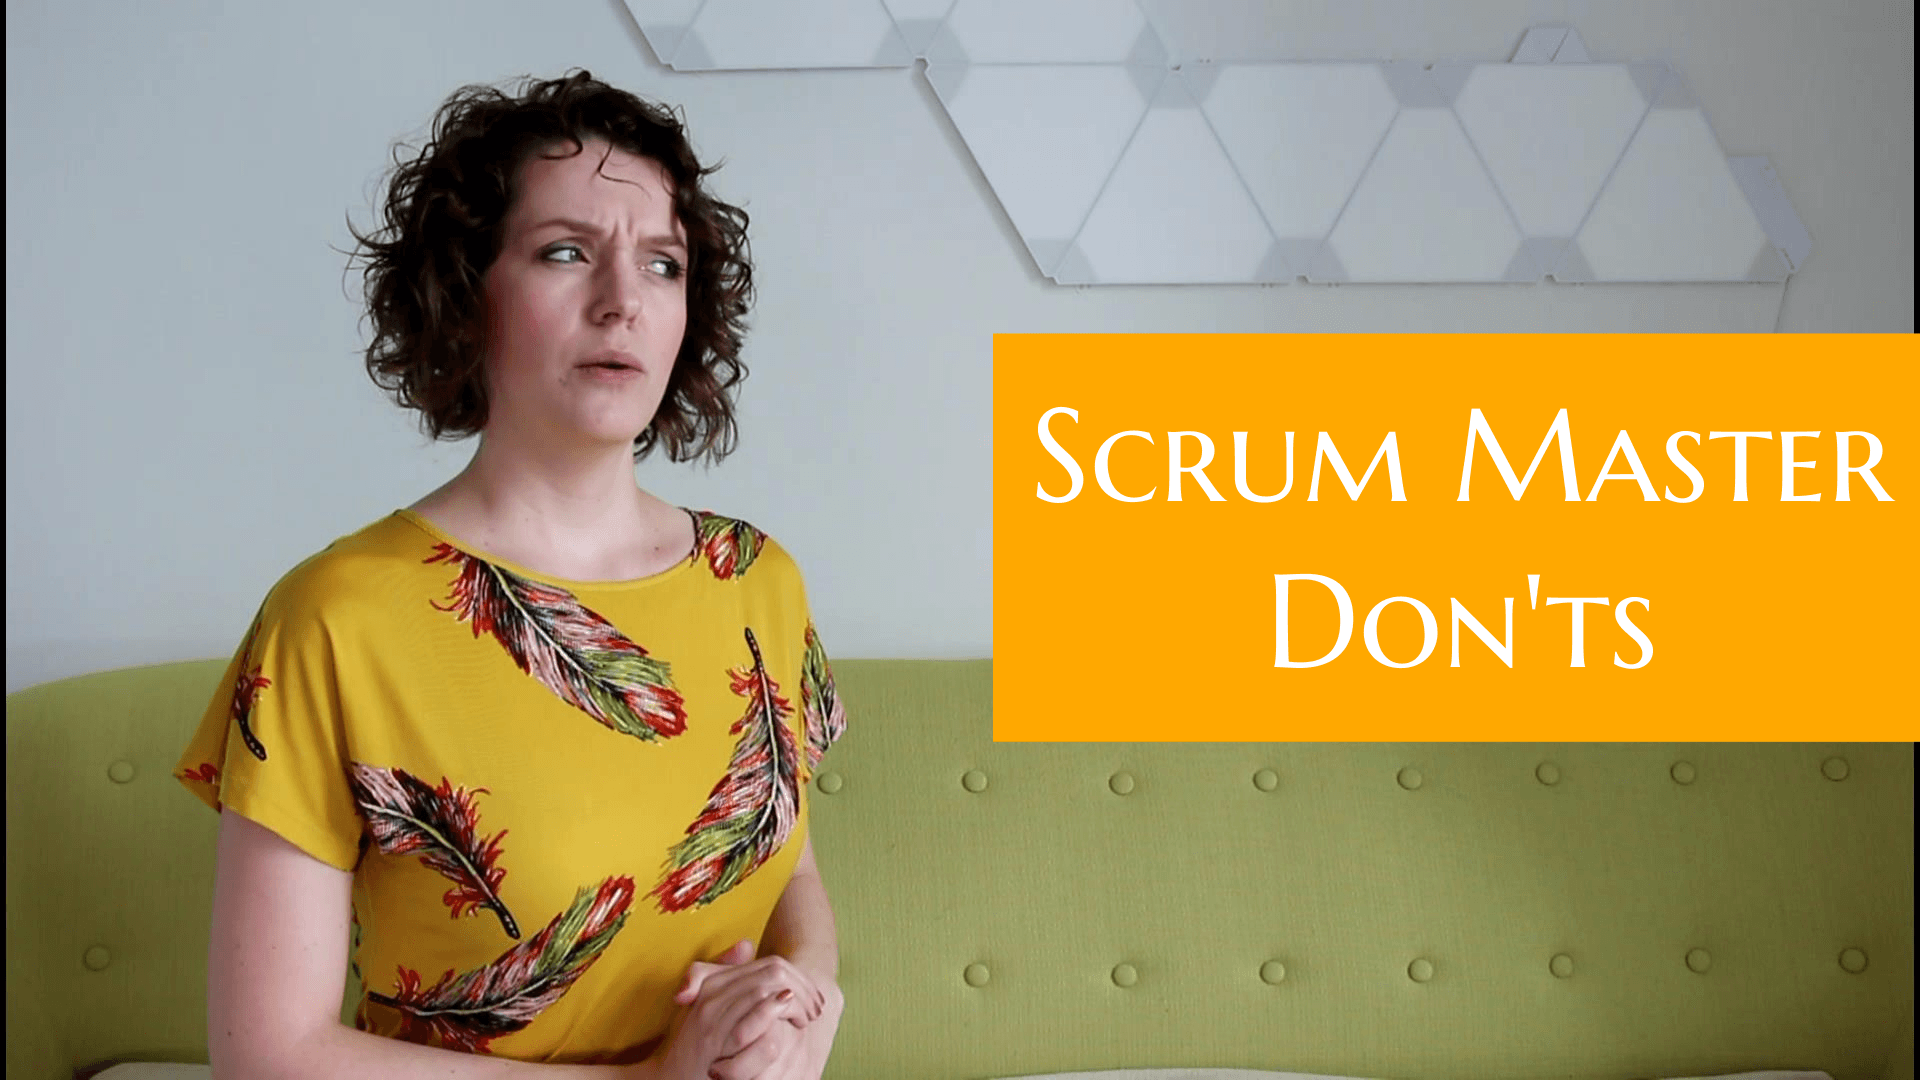 If you are a Scrum Master, Don’t do these things